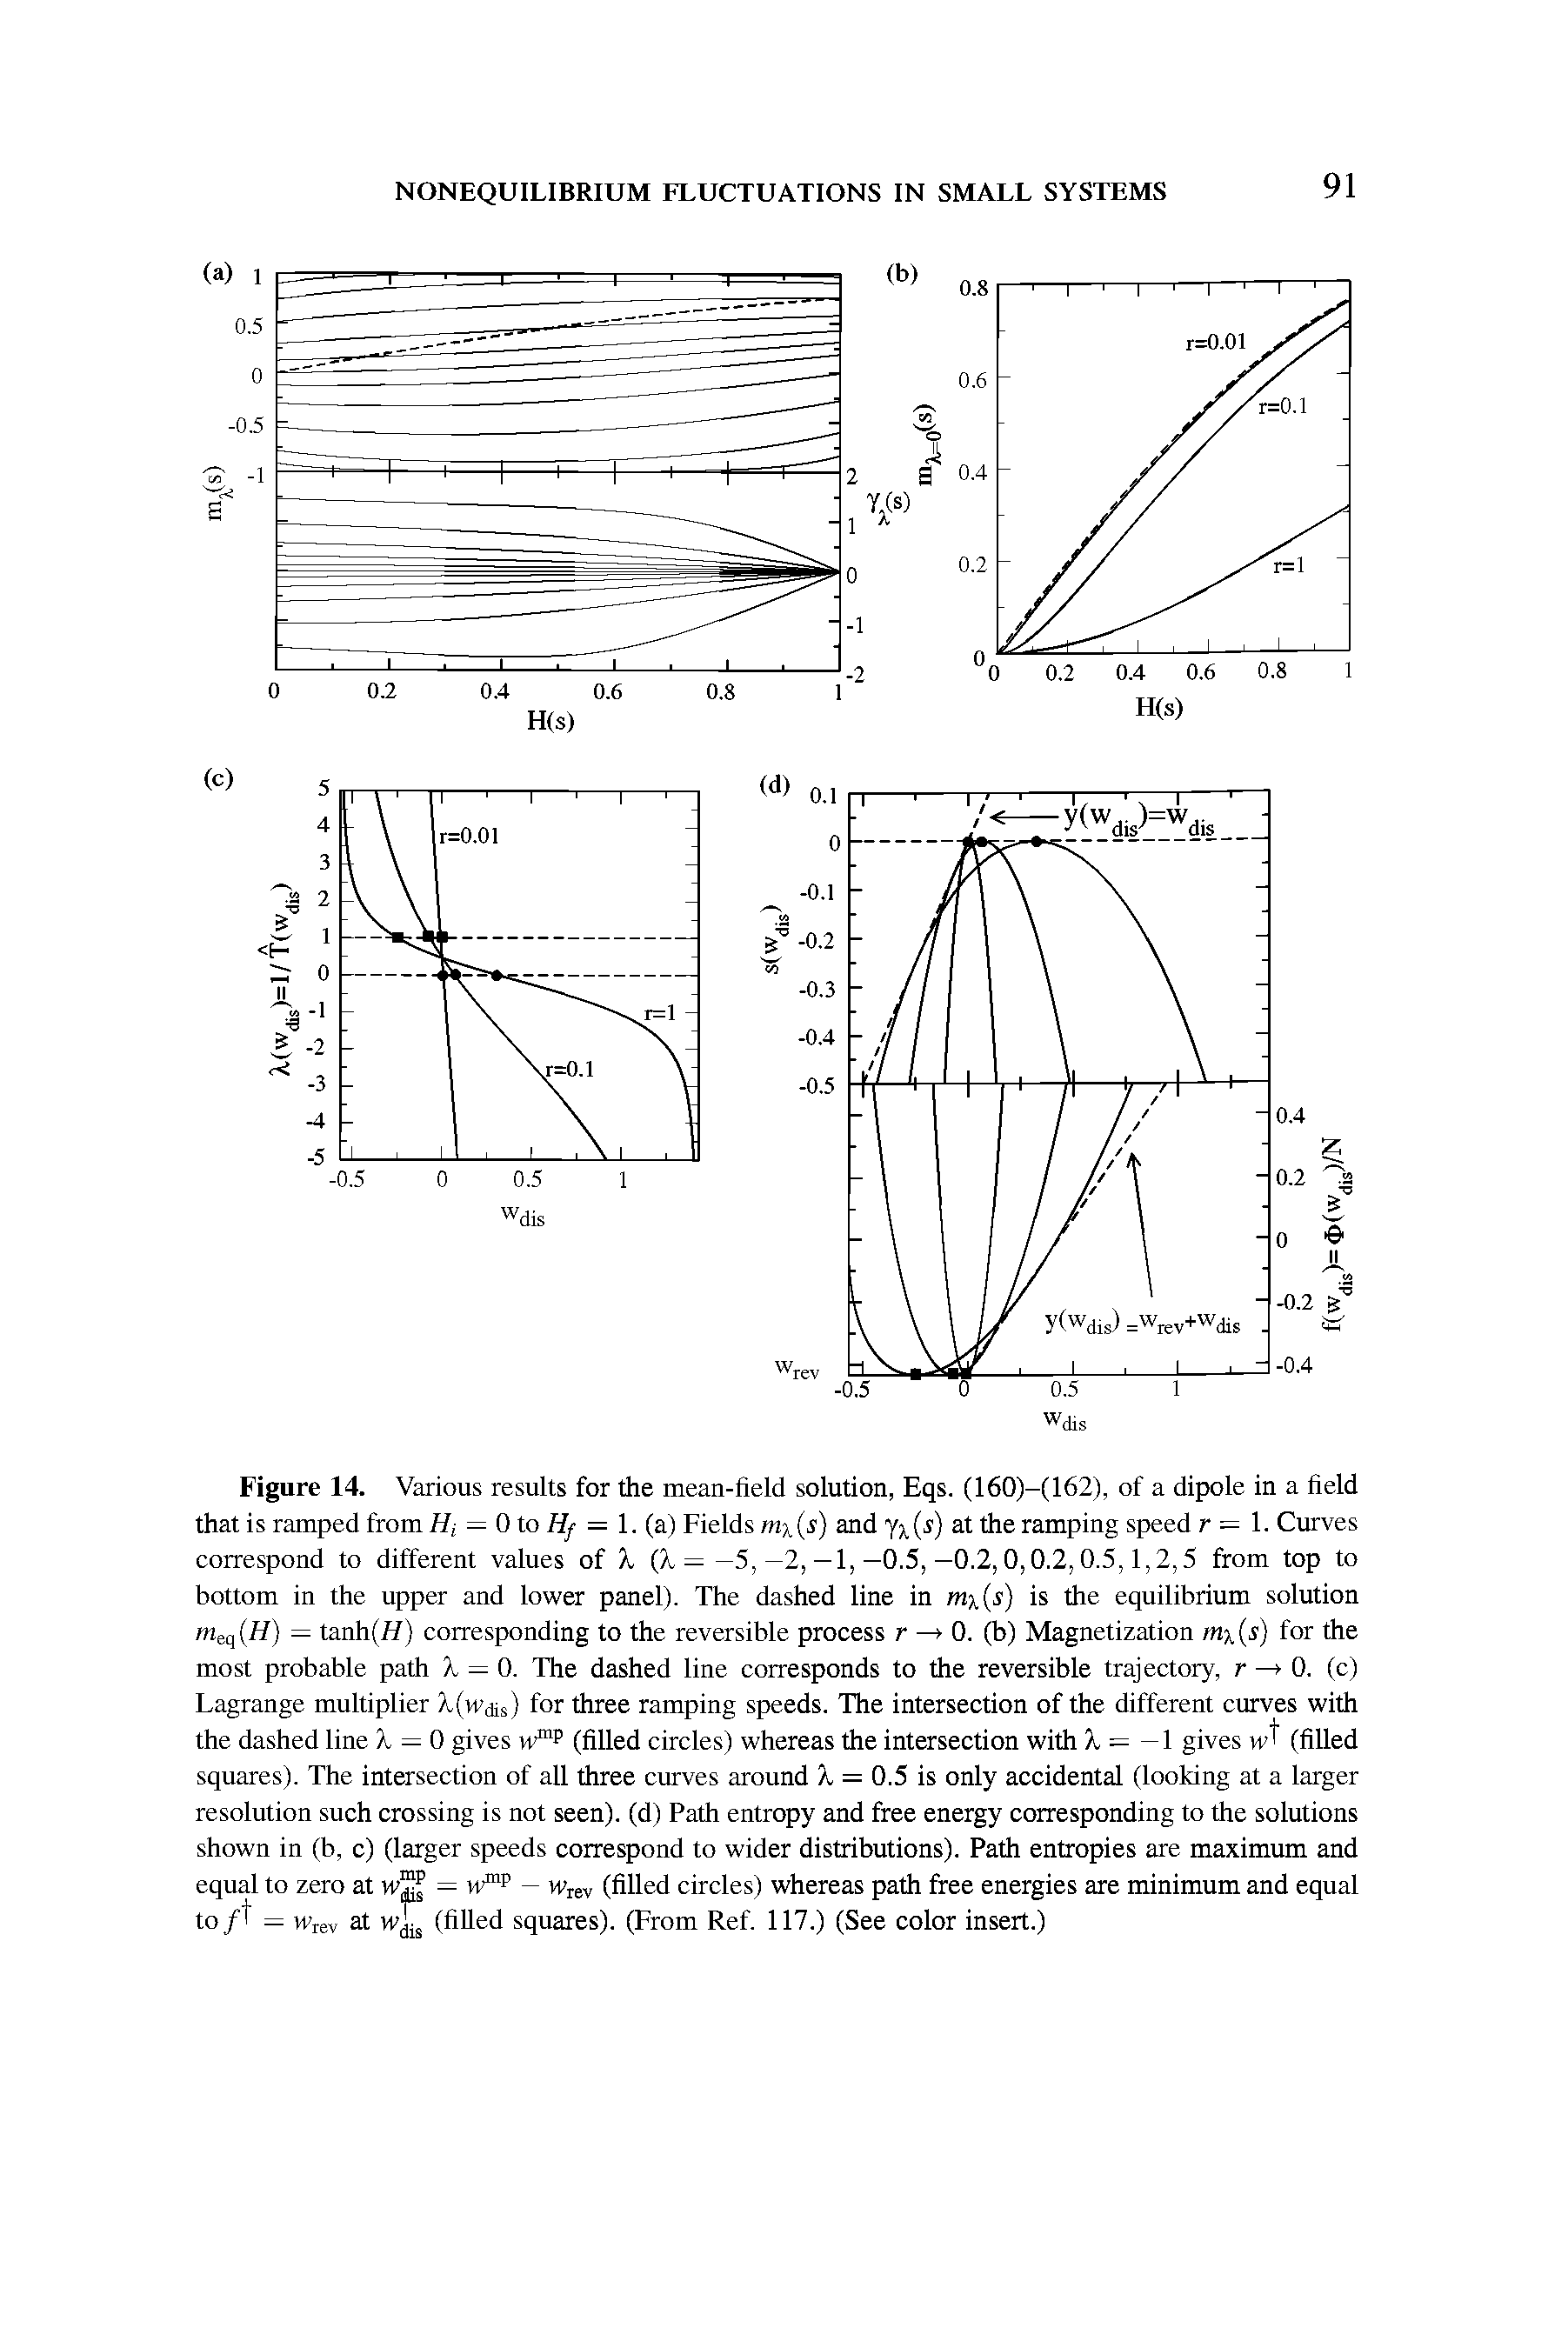 Figure 14. Various results for the mean-field solution, Eqs. (160)-(162), of a dipole in a field that is ramped from Hi = 0 to Hf = (a) Fields mx s) and 1x s) at the ramping speed r = 1. Curves...